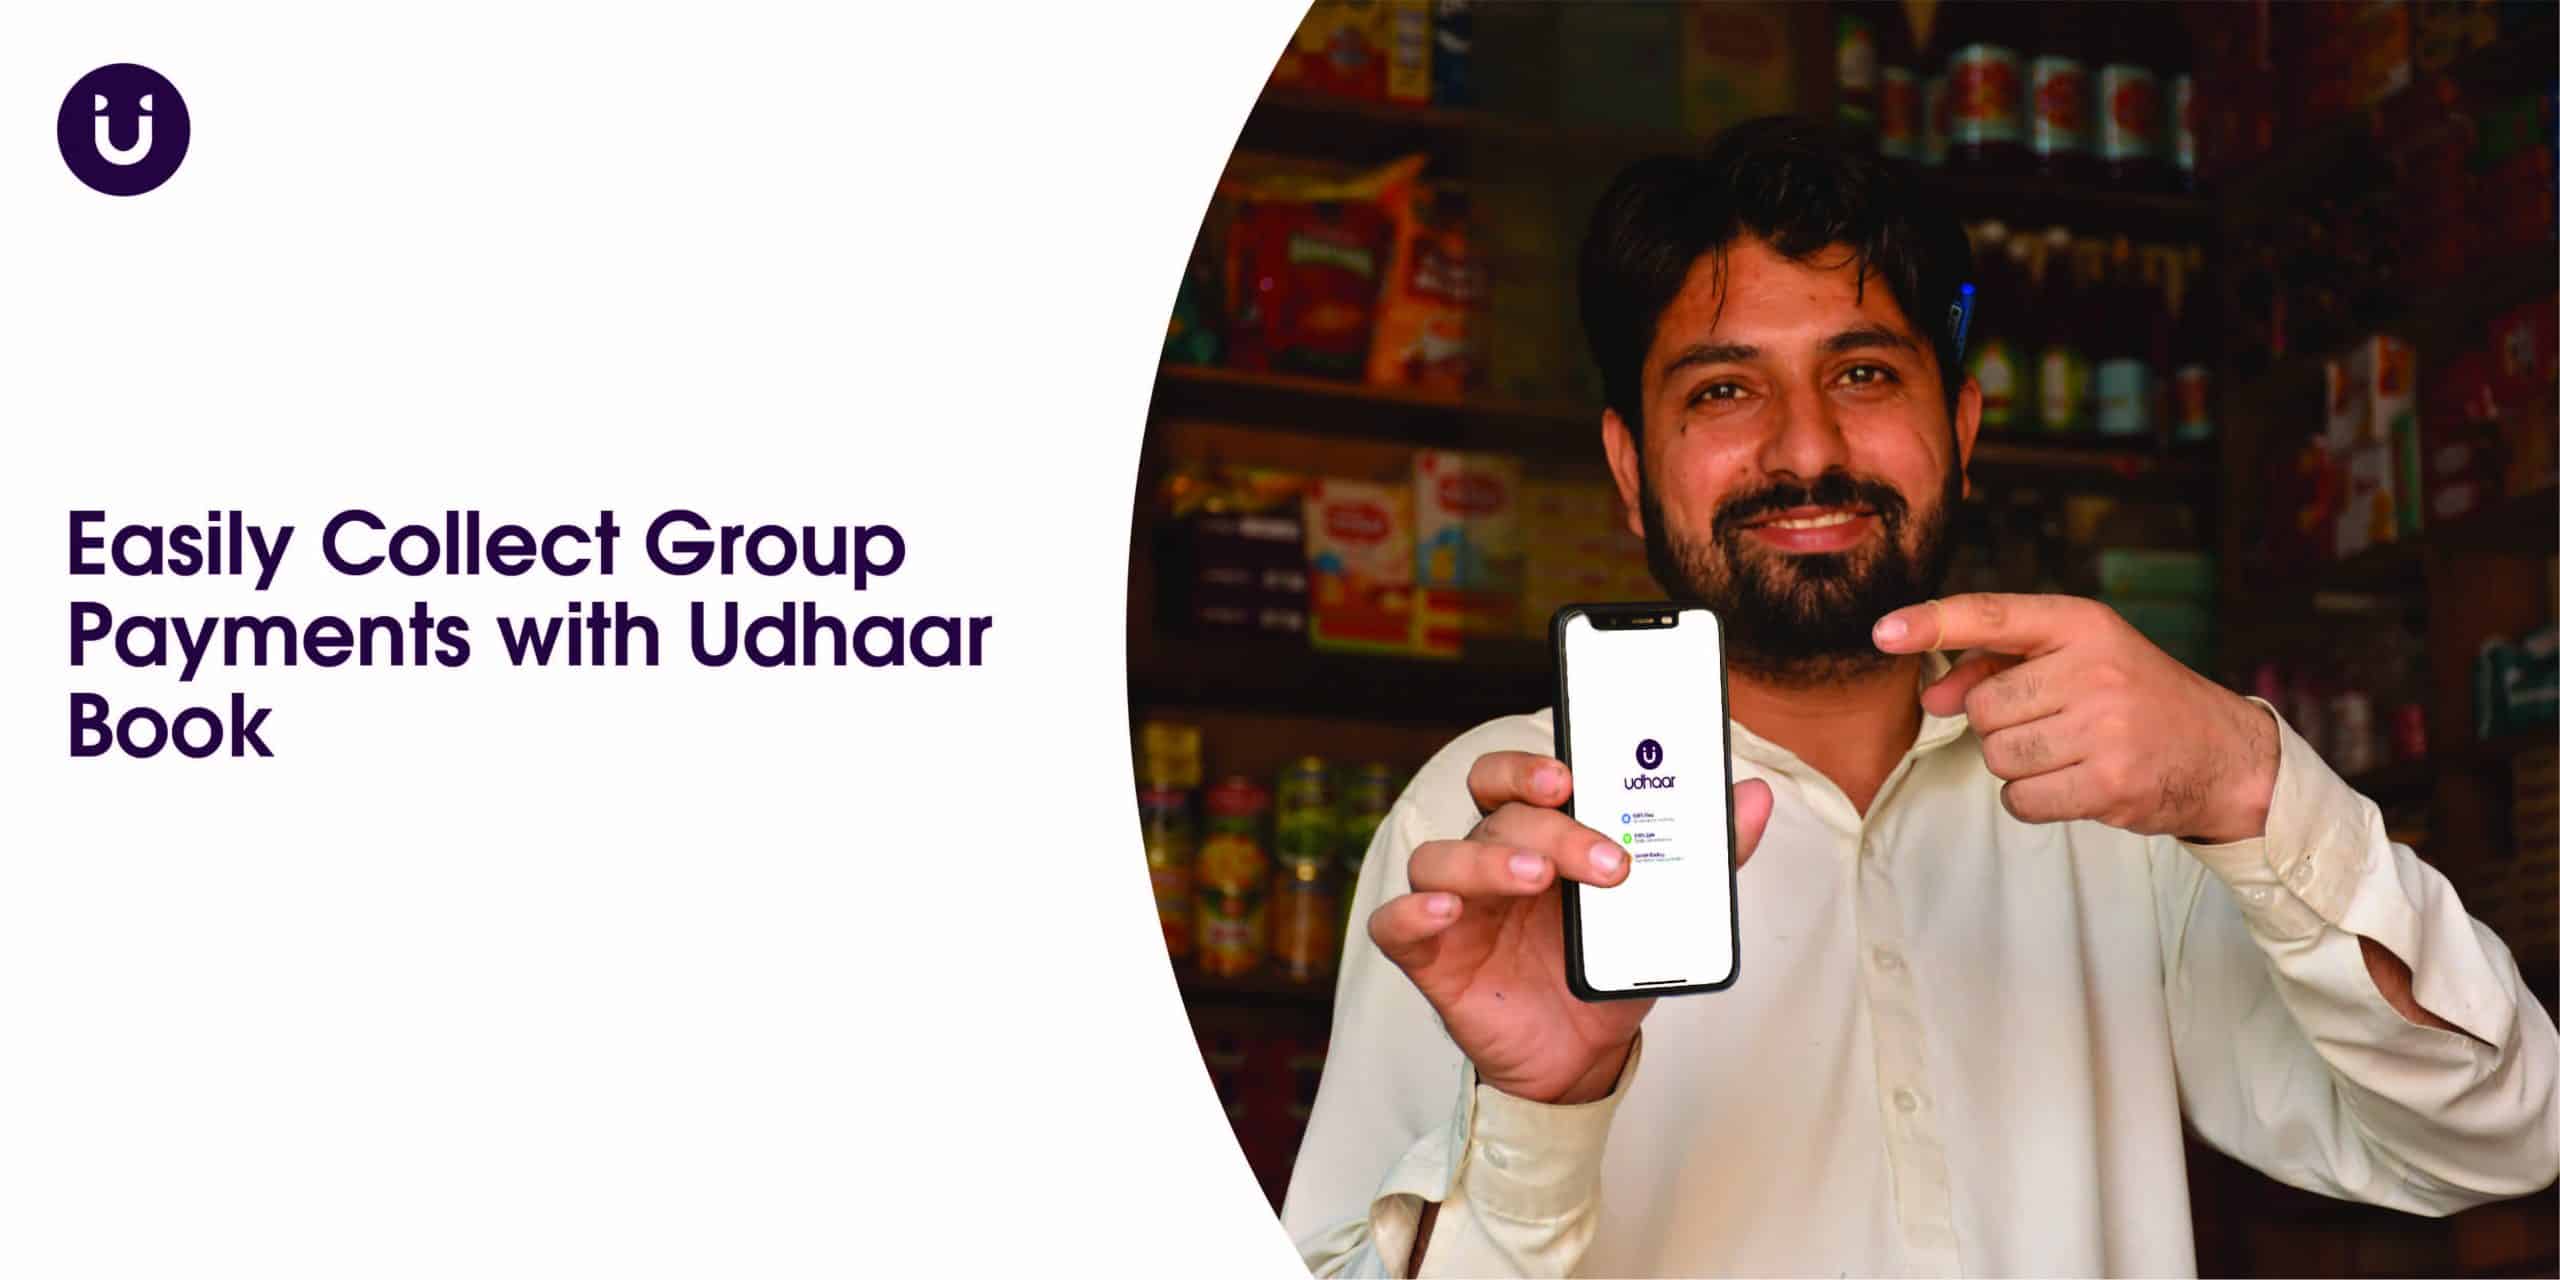 Easily Collect Group Payments with Udhaar Book